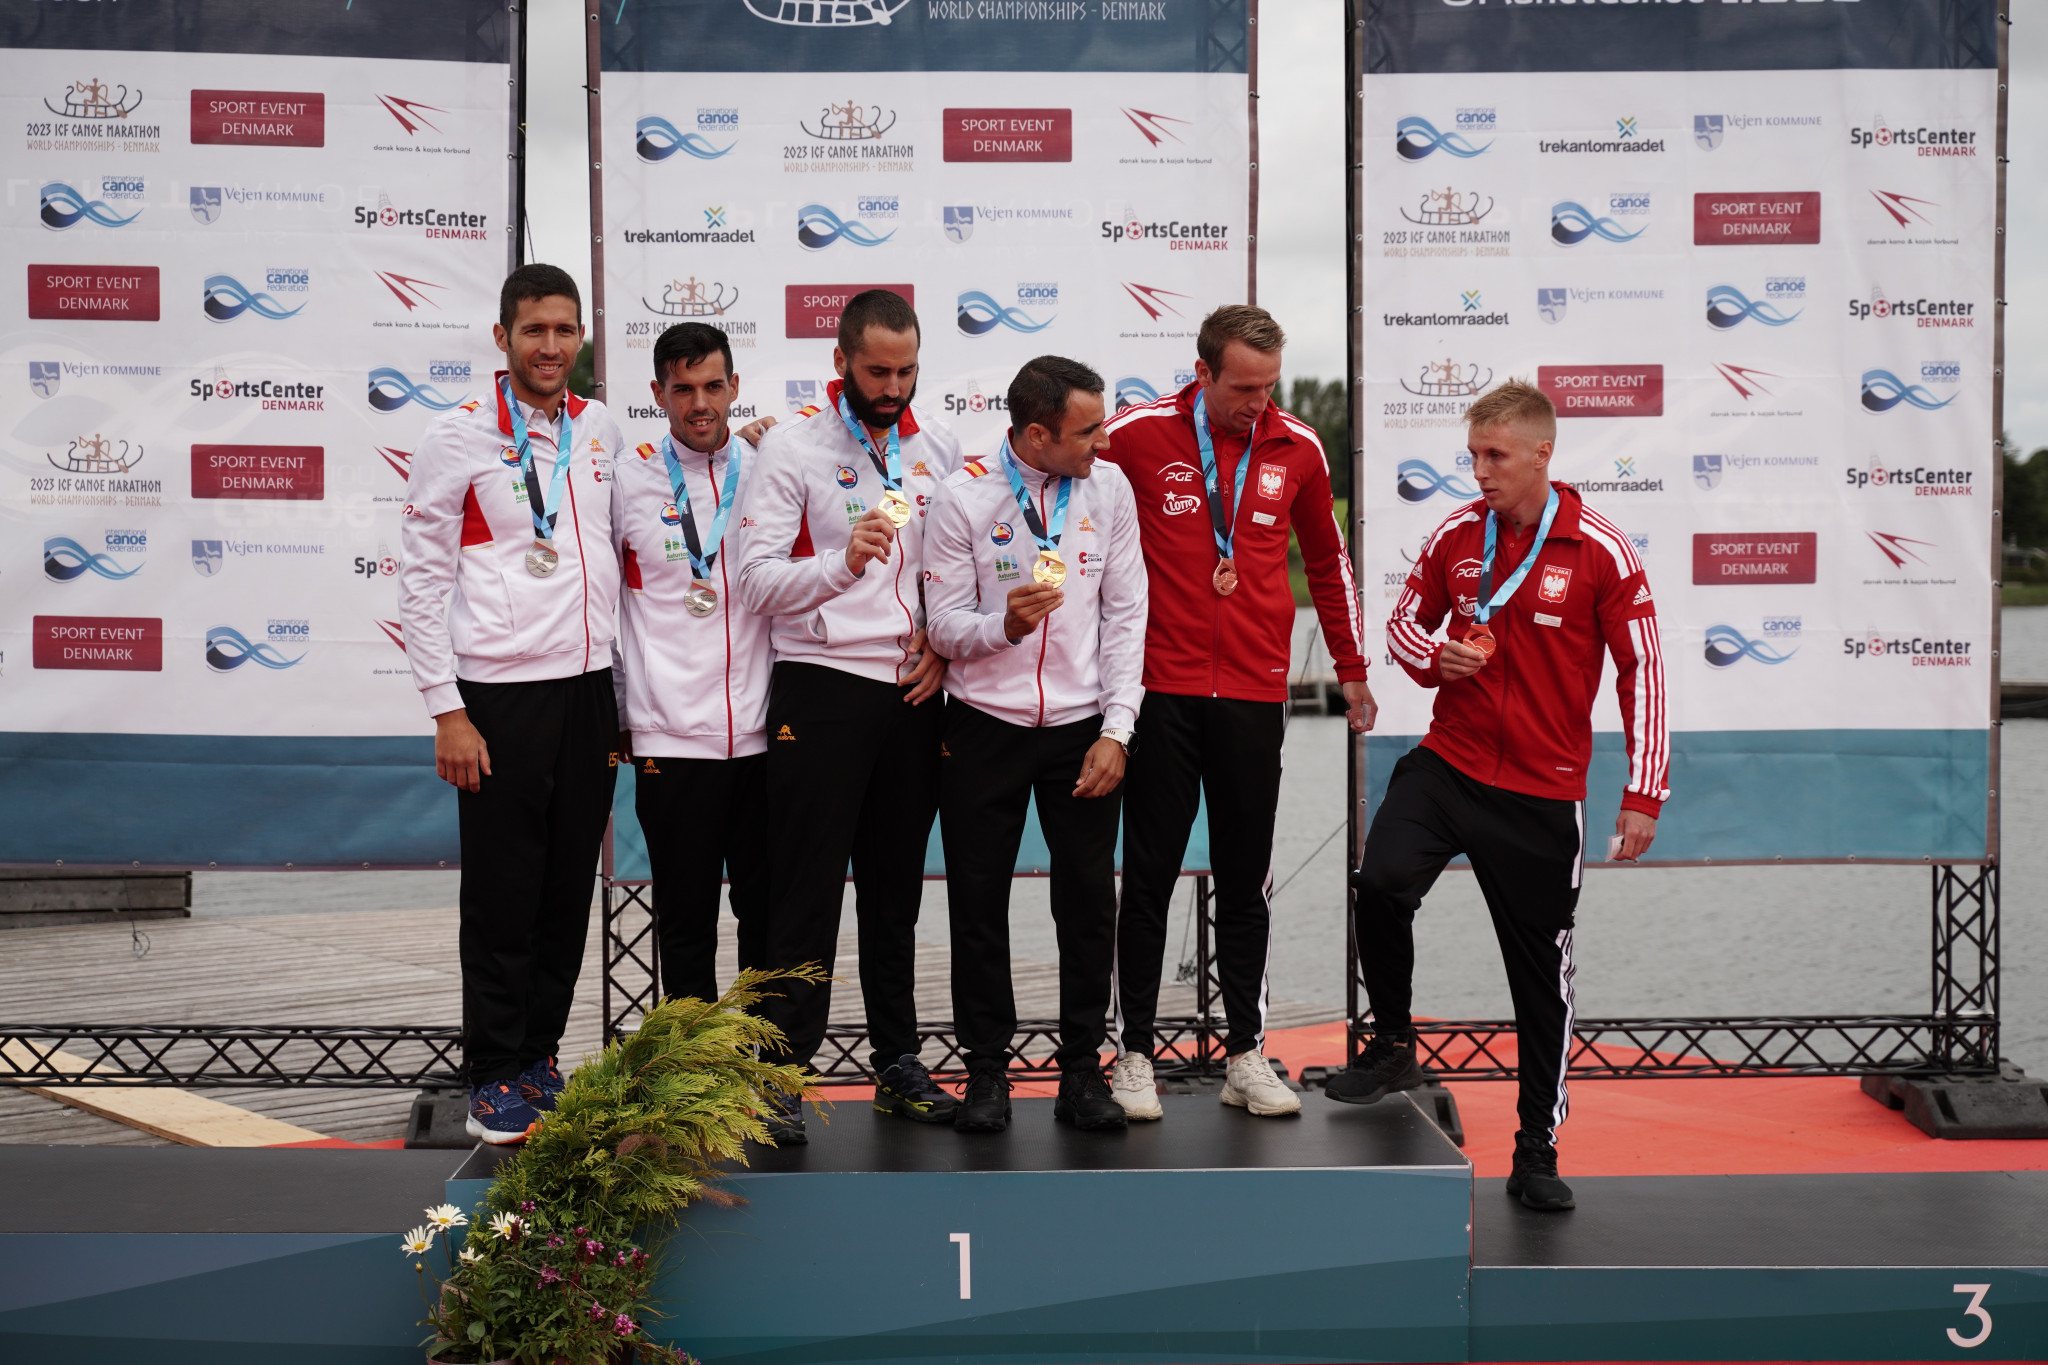 The final sets of medals were handed out including for the men's C2 race won by Spain's Manuel Campos and Diego Romero ©Svend-Erik Boysen/2023 ICF Canoe Marathon World Championships, Denmark